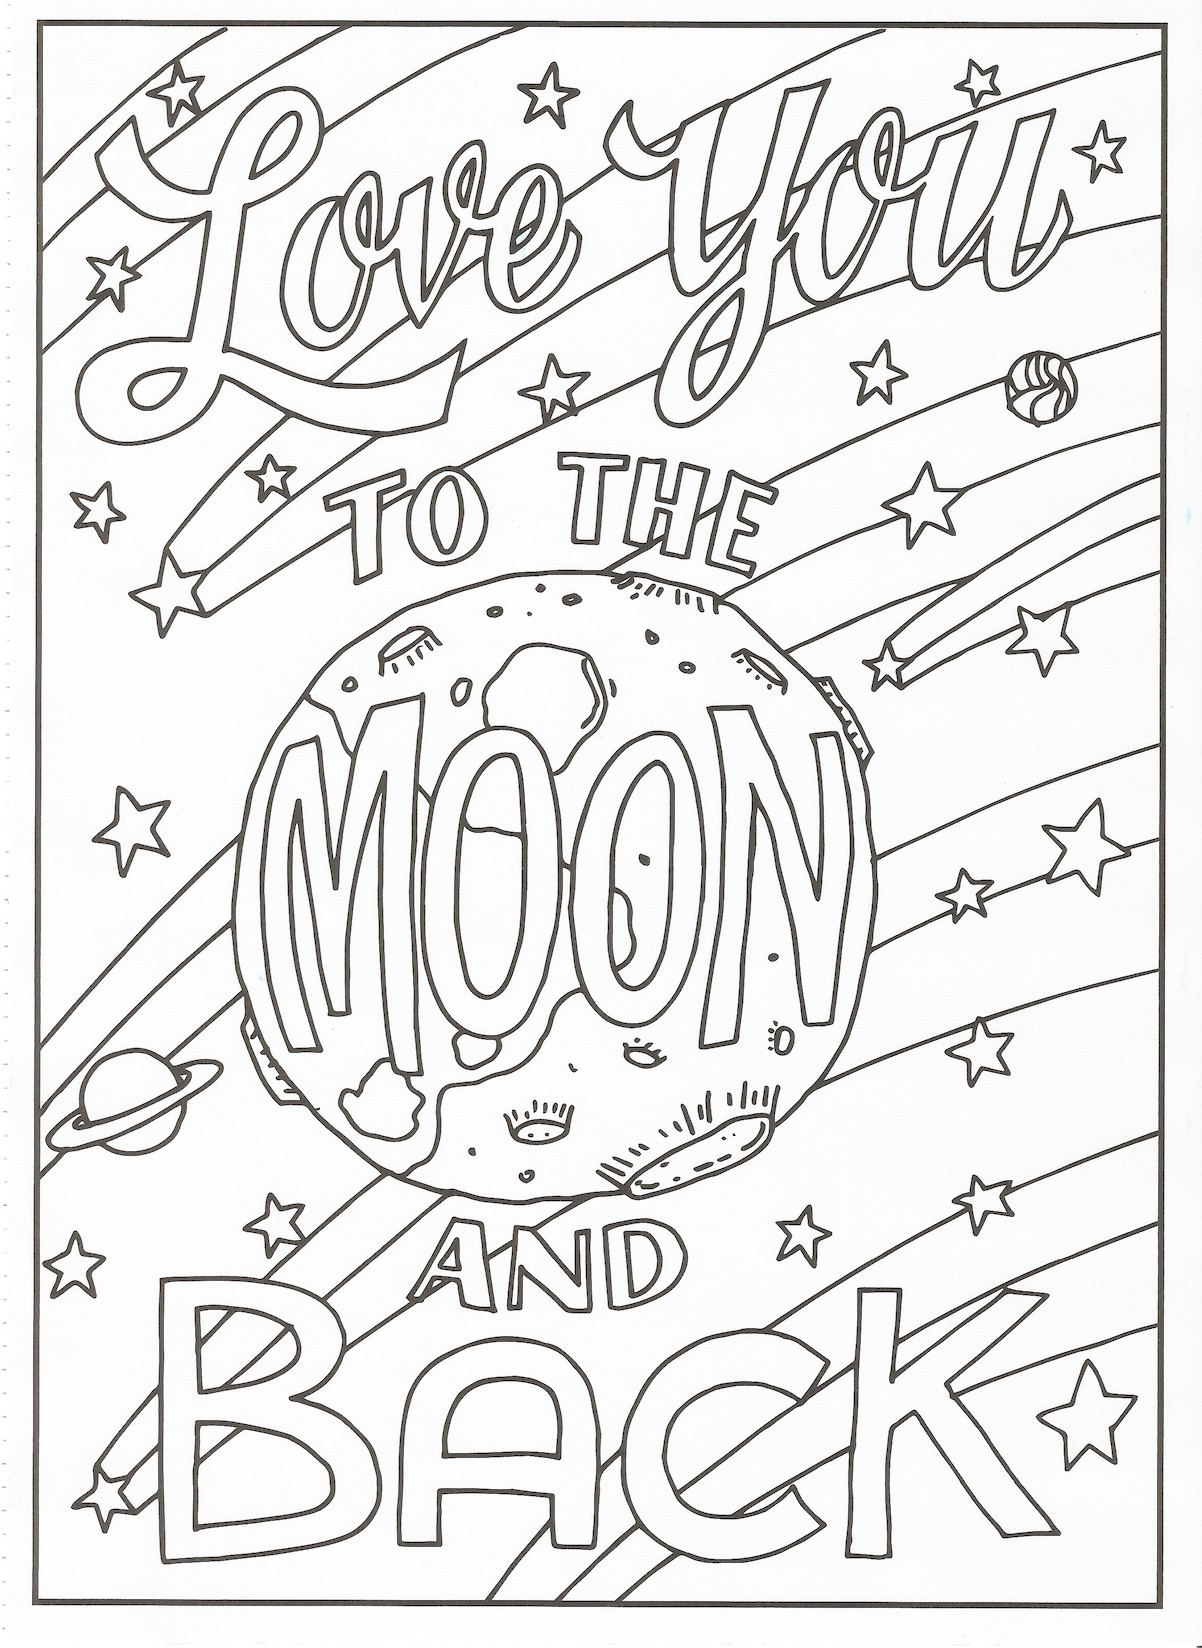 Timeless Creations Creative Quotes Coloring Page Love You to the Moon and Back